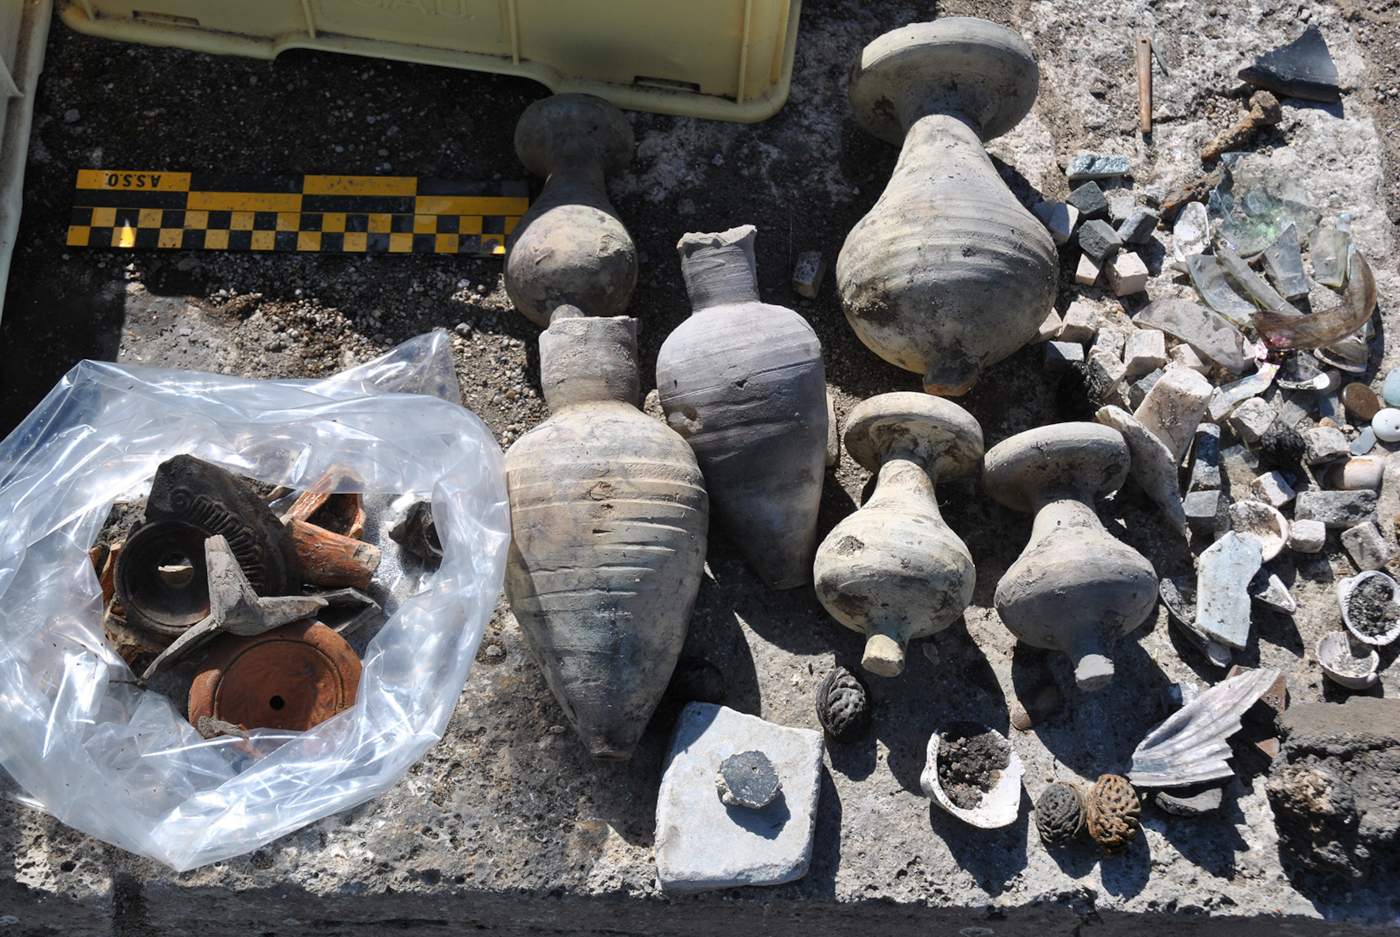 Well-preserved ancient finds of objects from imperial life emerged in the Archaeological Park of Ancient Ostia